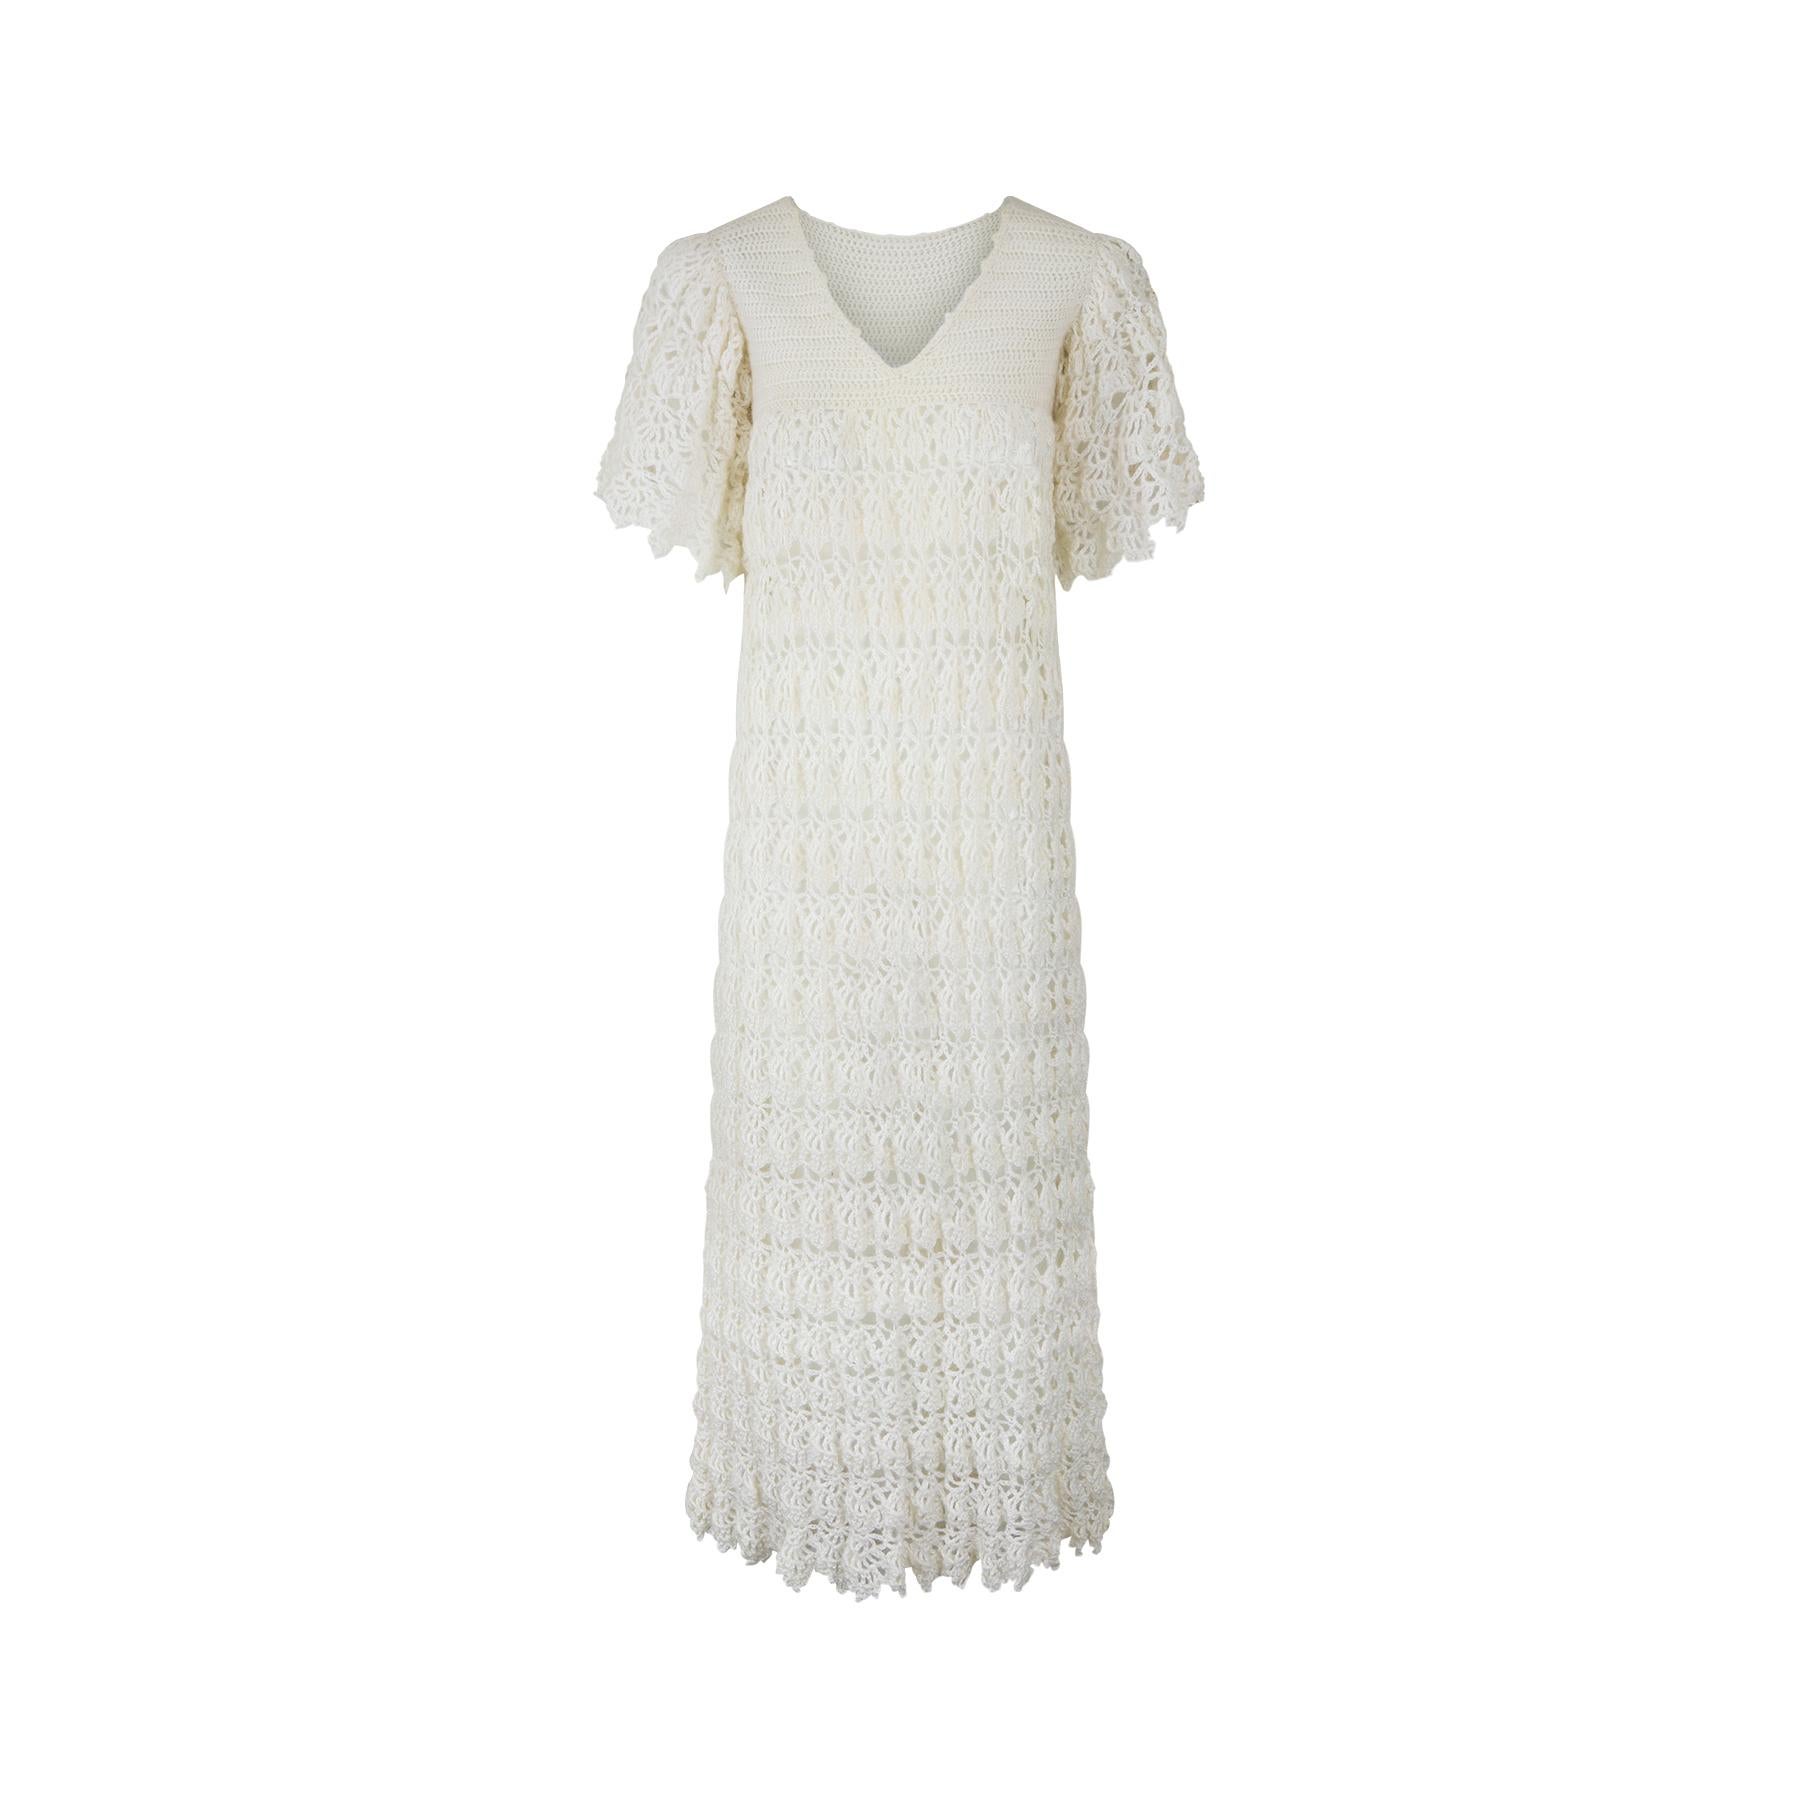 This 1970s knitted wool maxi dress has clearly been made with love and attention by a very good home knitter. It has a tighter knitted empire line bodice and a looser patterned ankle length skirt with horizontal rows of a geometric diamond-shaped